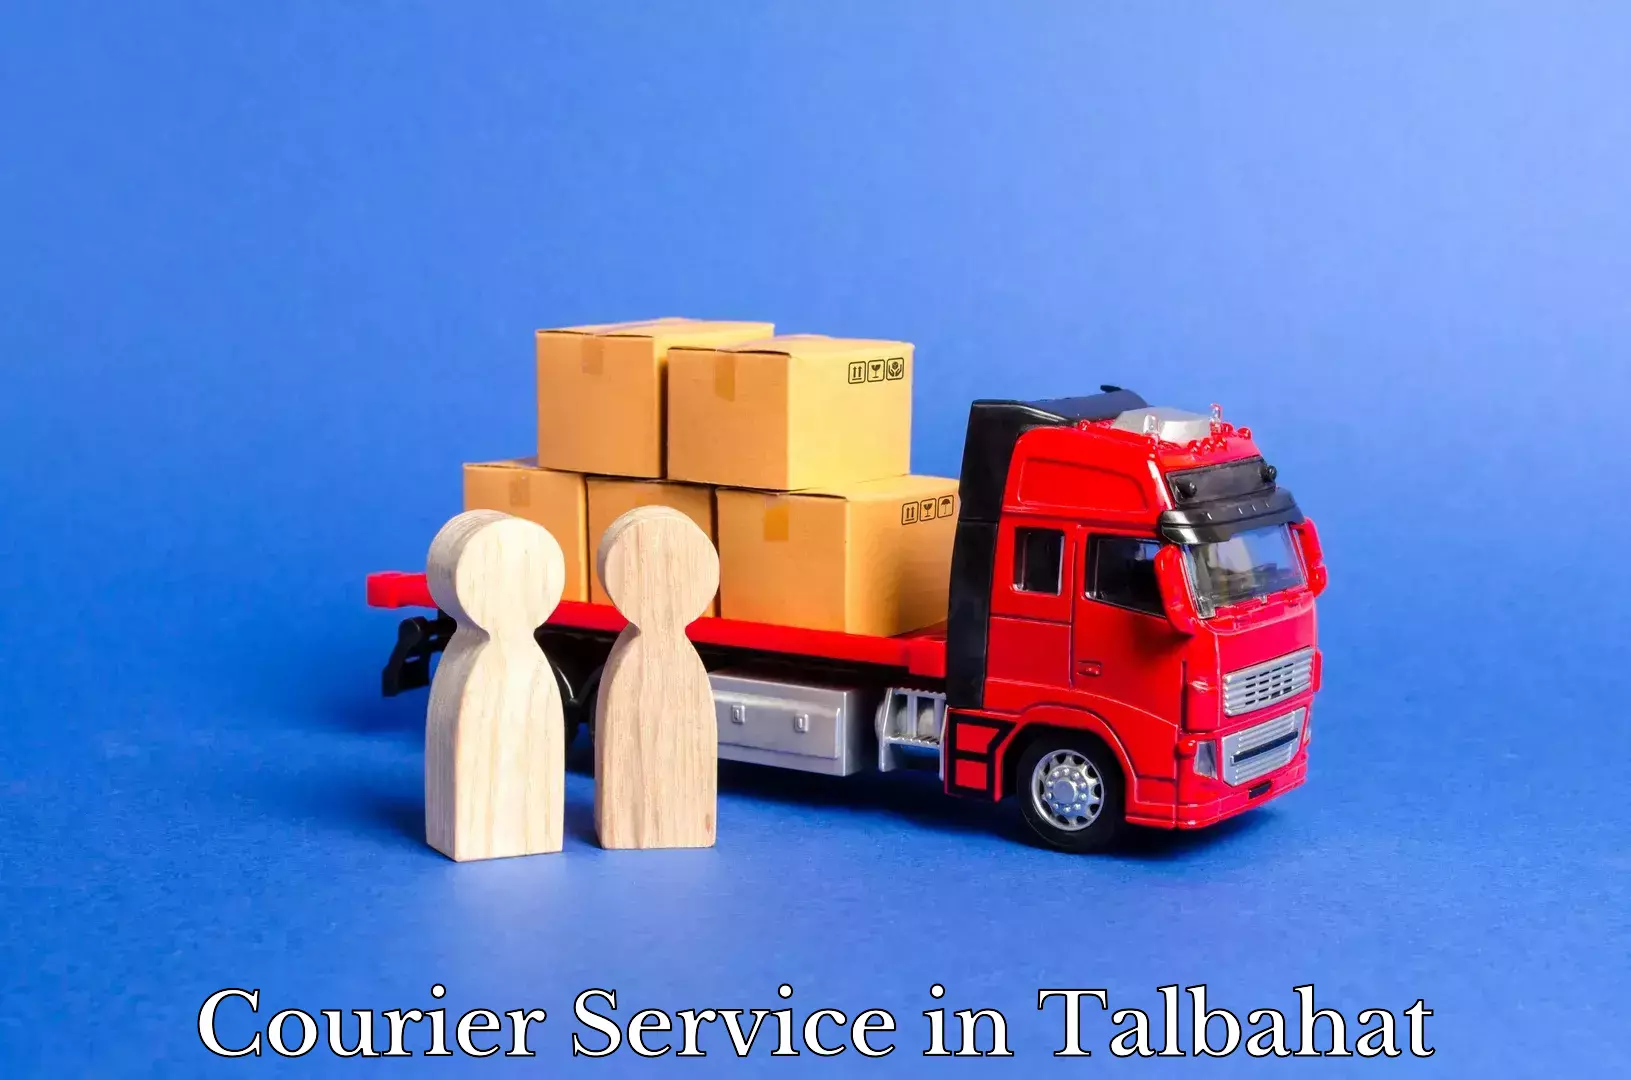 Customized shipping options in Talbahat